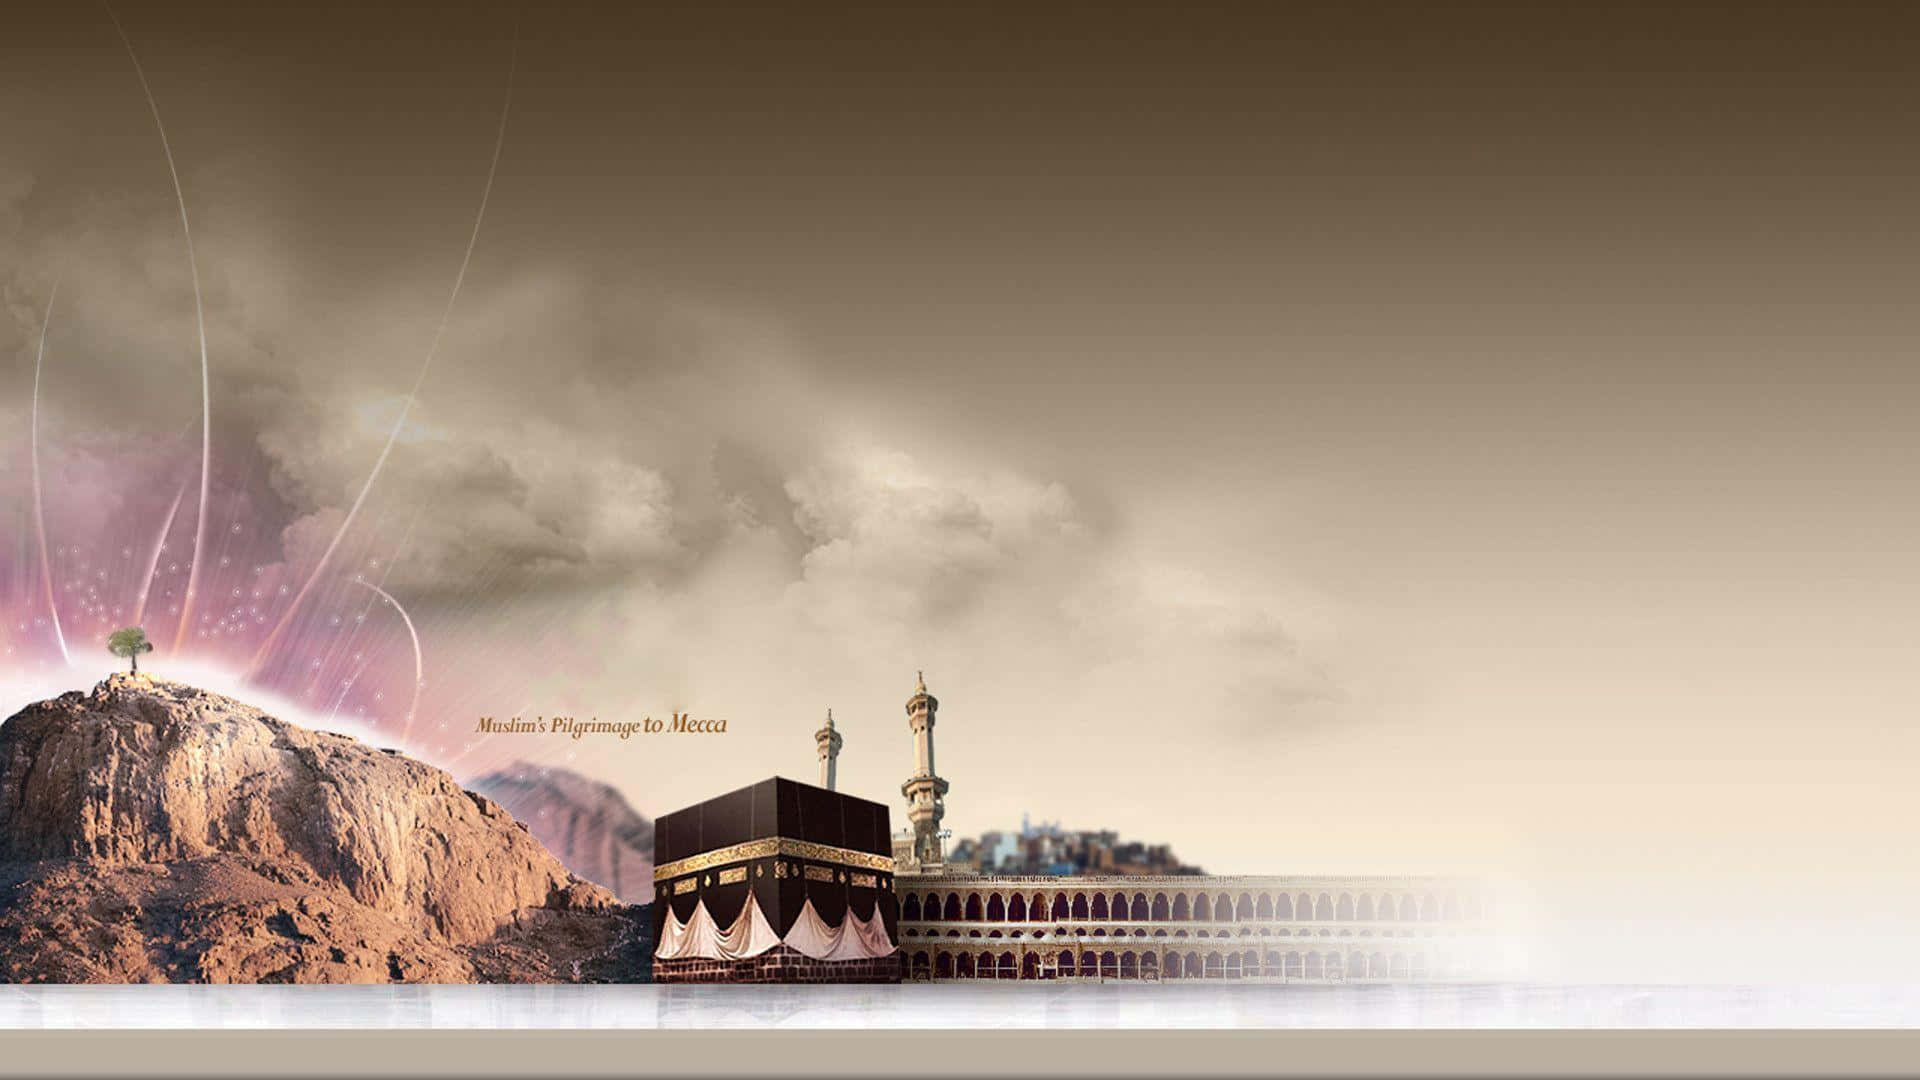 "View of the Kaaba, the holiest place in Islam"